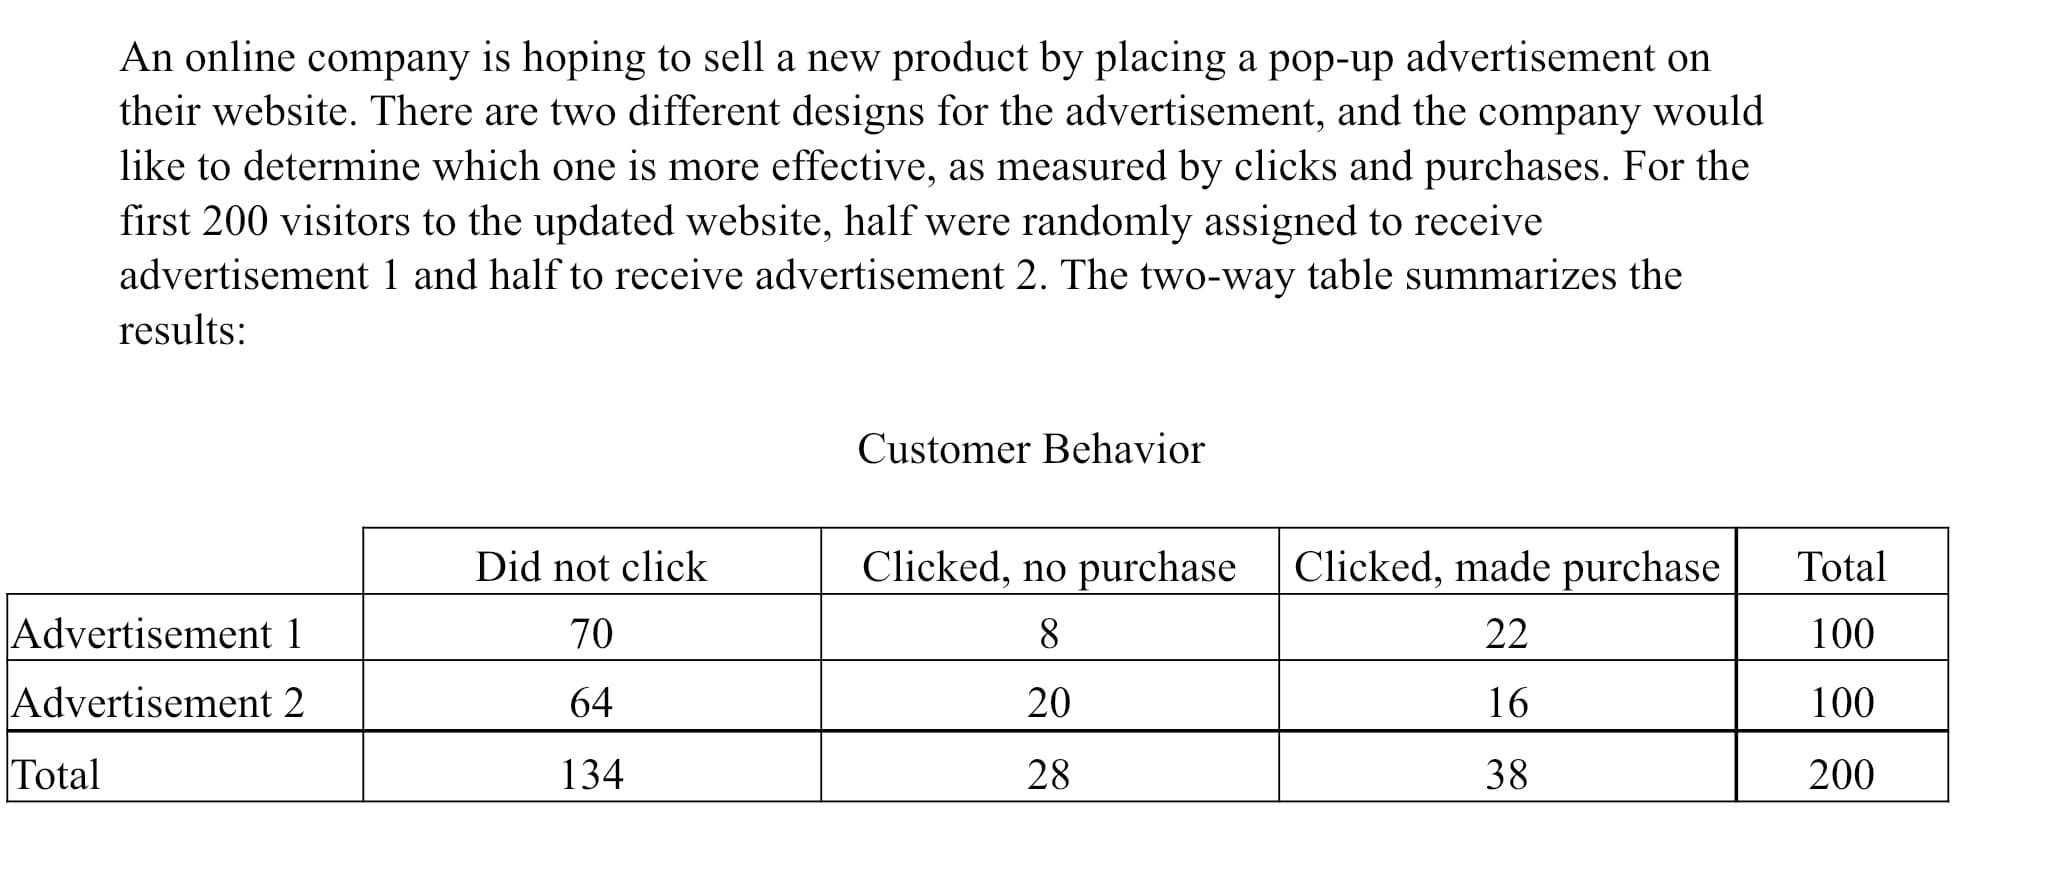 An online company is hoping to sell a new product by placing a pop-up advertisement on
their website. There are two different designs for the advertisement, and the company would
like to determine which one is more effective, as measured by clicks and purchases. For the
first 200 visitors to the updated website, half were randomly assigned to receive
advertisement 1 and half to receive advertisement 2. The two-way table summarizes the
results:
Customer Behavior
Did not click
Clicked, no purchase
Clicked, made purchase
Total
Advertisement 1
70
8.
22
100
Advertisement 2
64
20
16
100
Total
134
28
38
200
